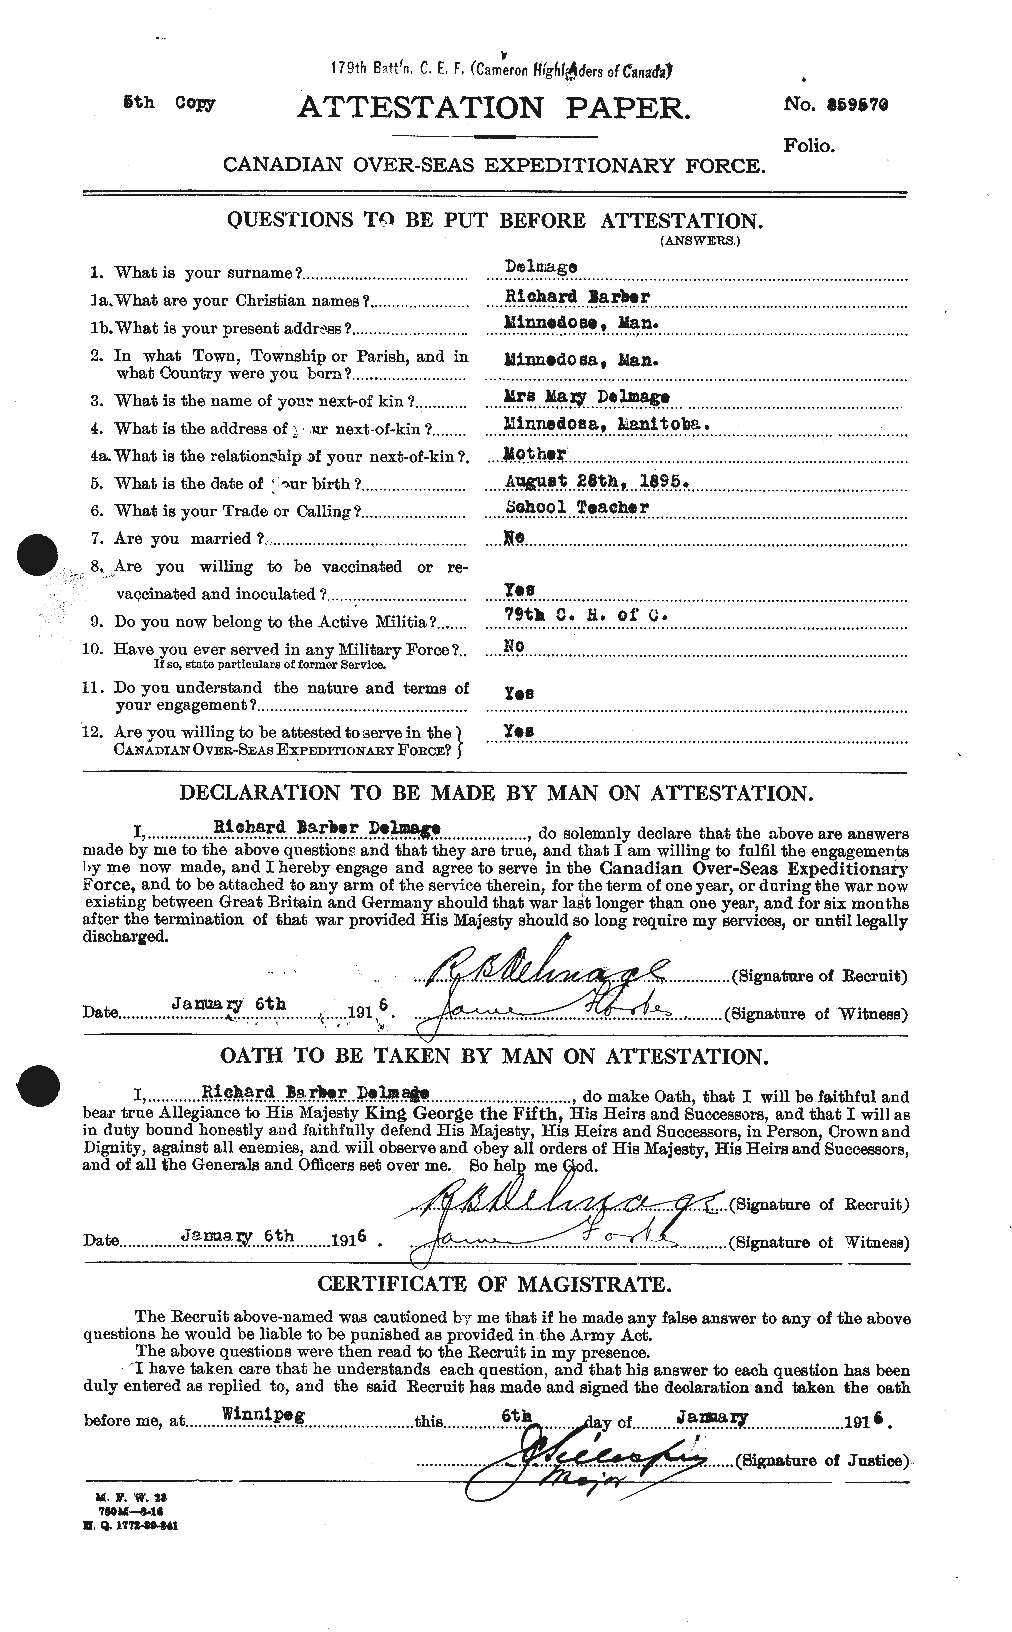 Personnel Records of the First World War - CEF 287114a